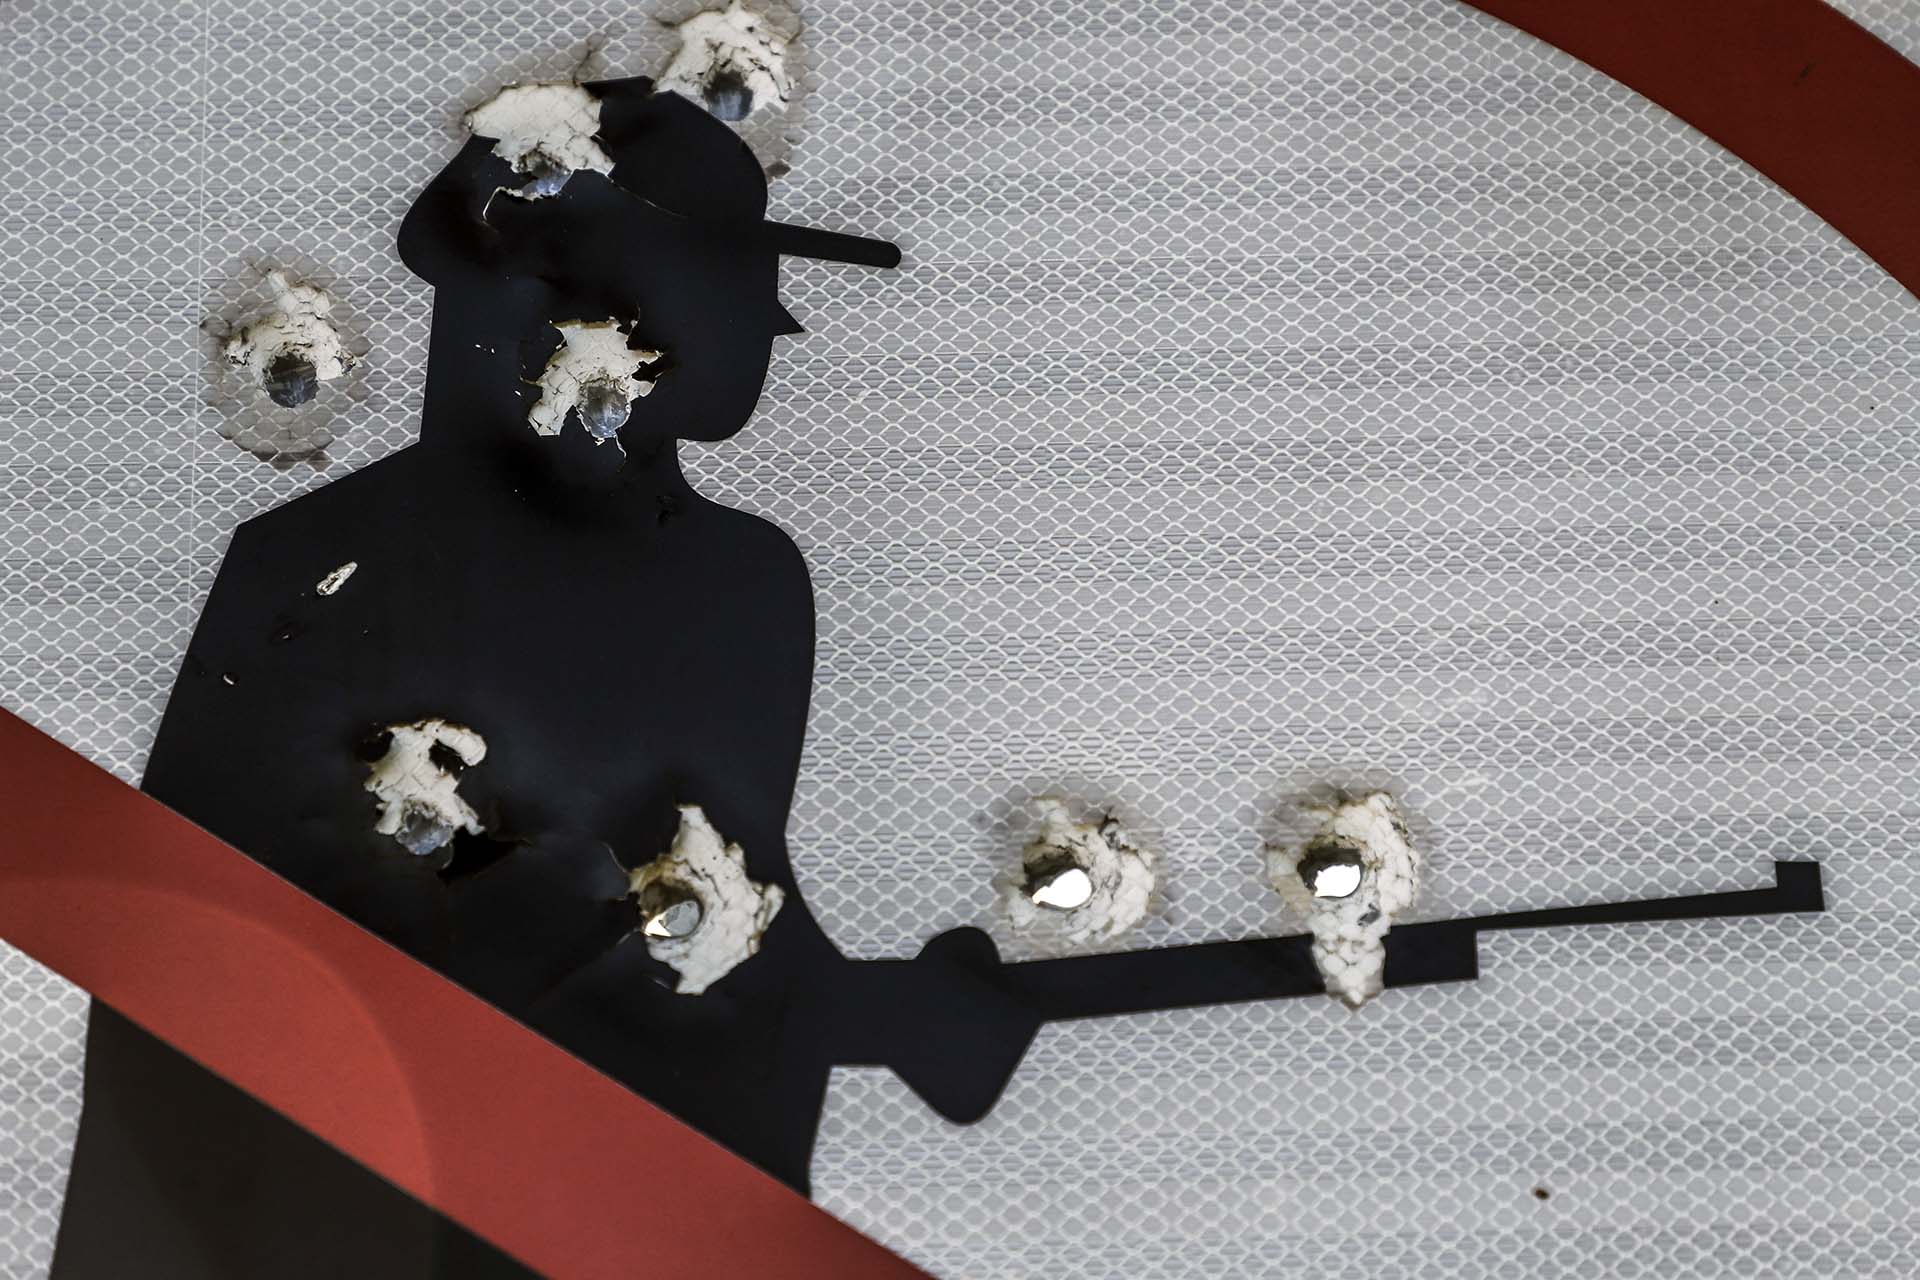 A road sign is seen with bullet holes in Badiraguato -Mexican mobster Joaquin "El Chapo" Guzman's hometown-, Sinaloa State, Mexico on February 8, 2019. - If "El Chapo" returned to Badiraguato it would be a relief for its inhabitants because, according to them, there was neither poverty nor violence when he was there. Guzman was found guilty Tuesday by a New York jury of crimes spanning a quarter of a century as head of one of the world's most powerful drugs gangs. (Photo by RASHIDE FRIAS / AFP)